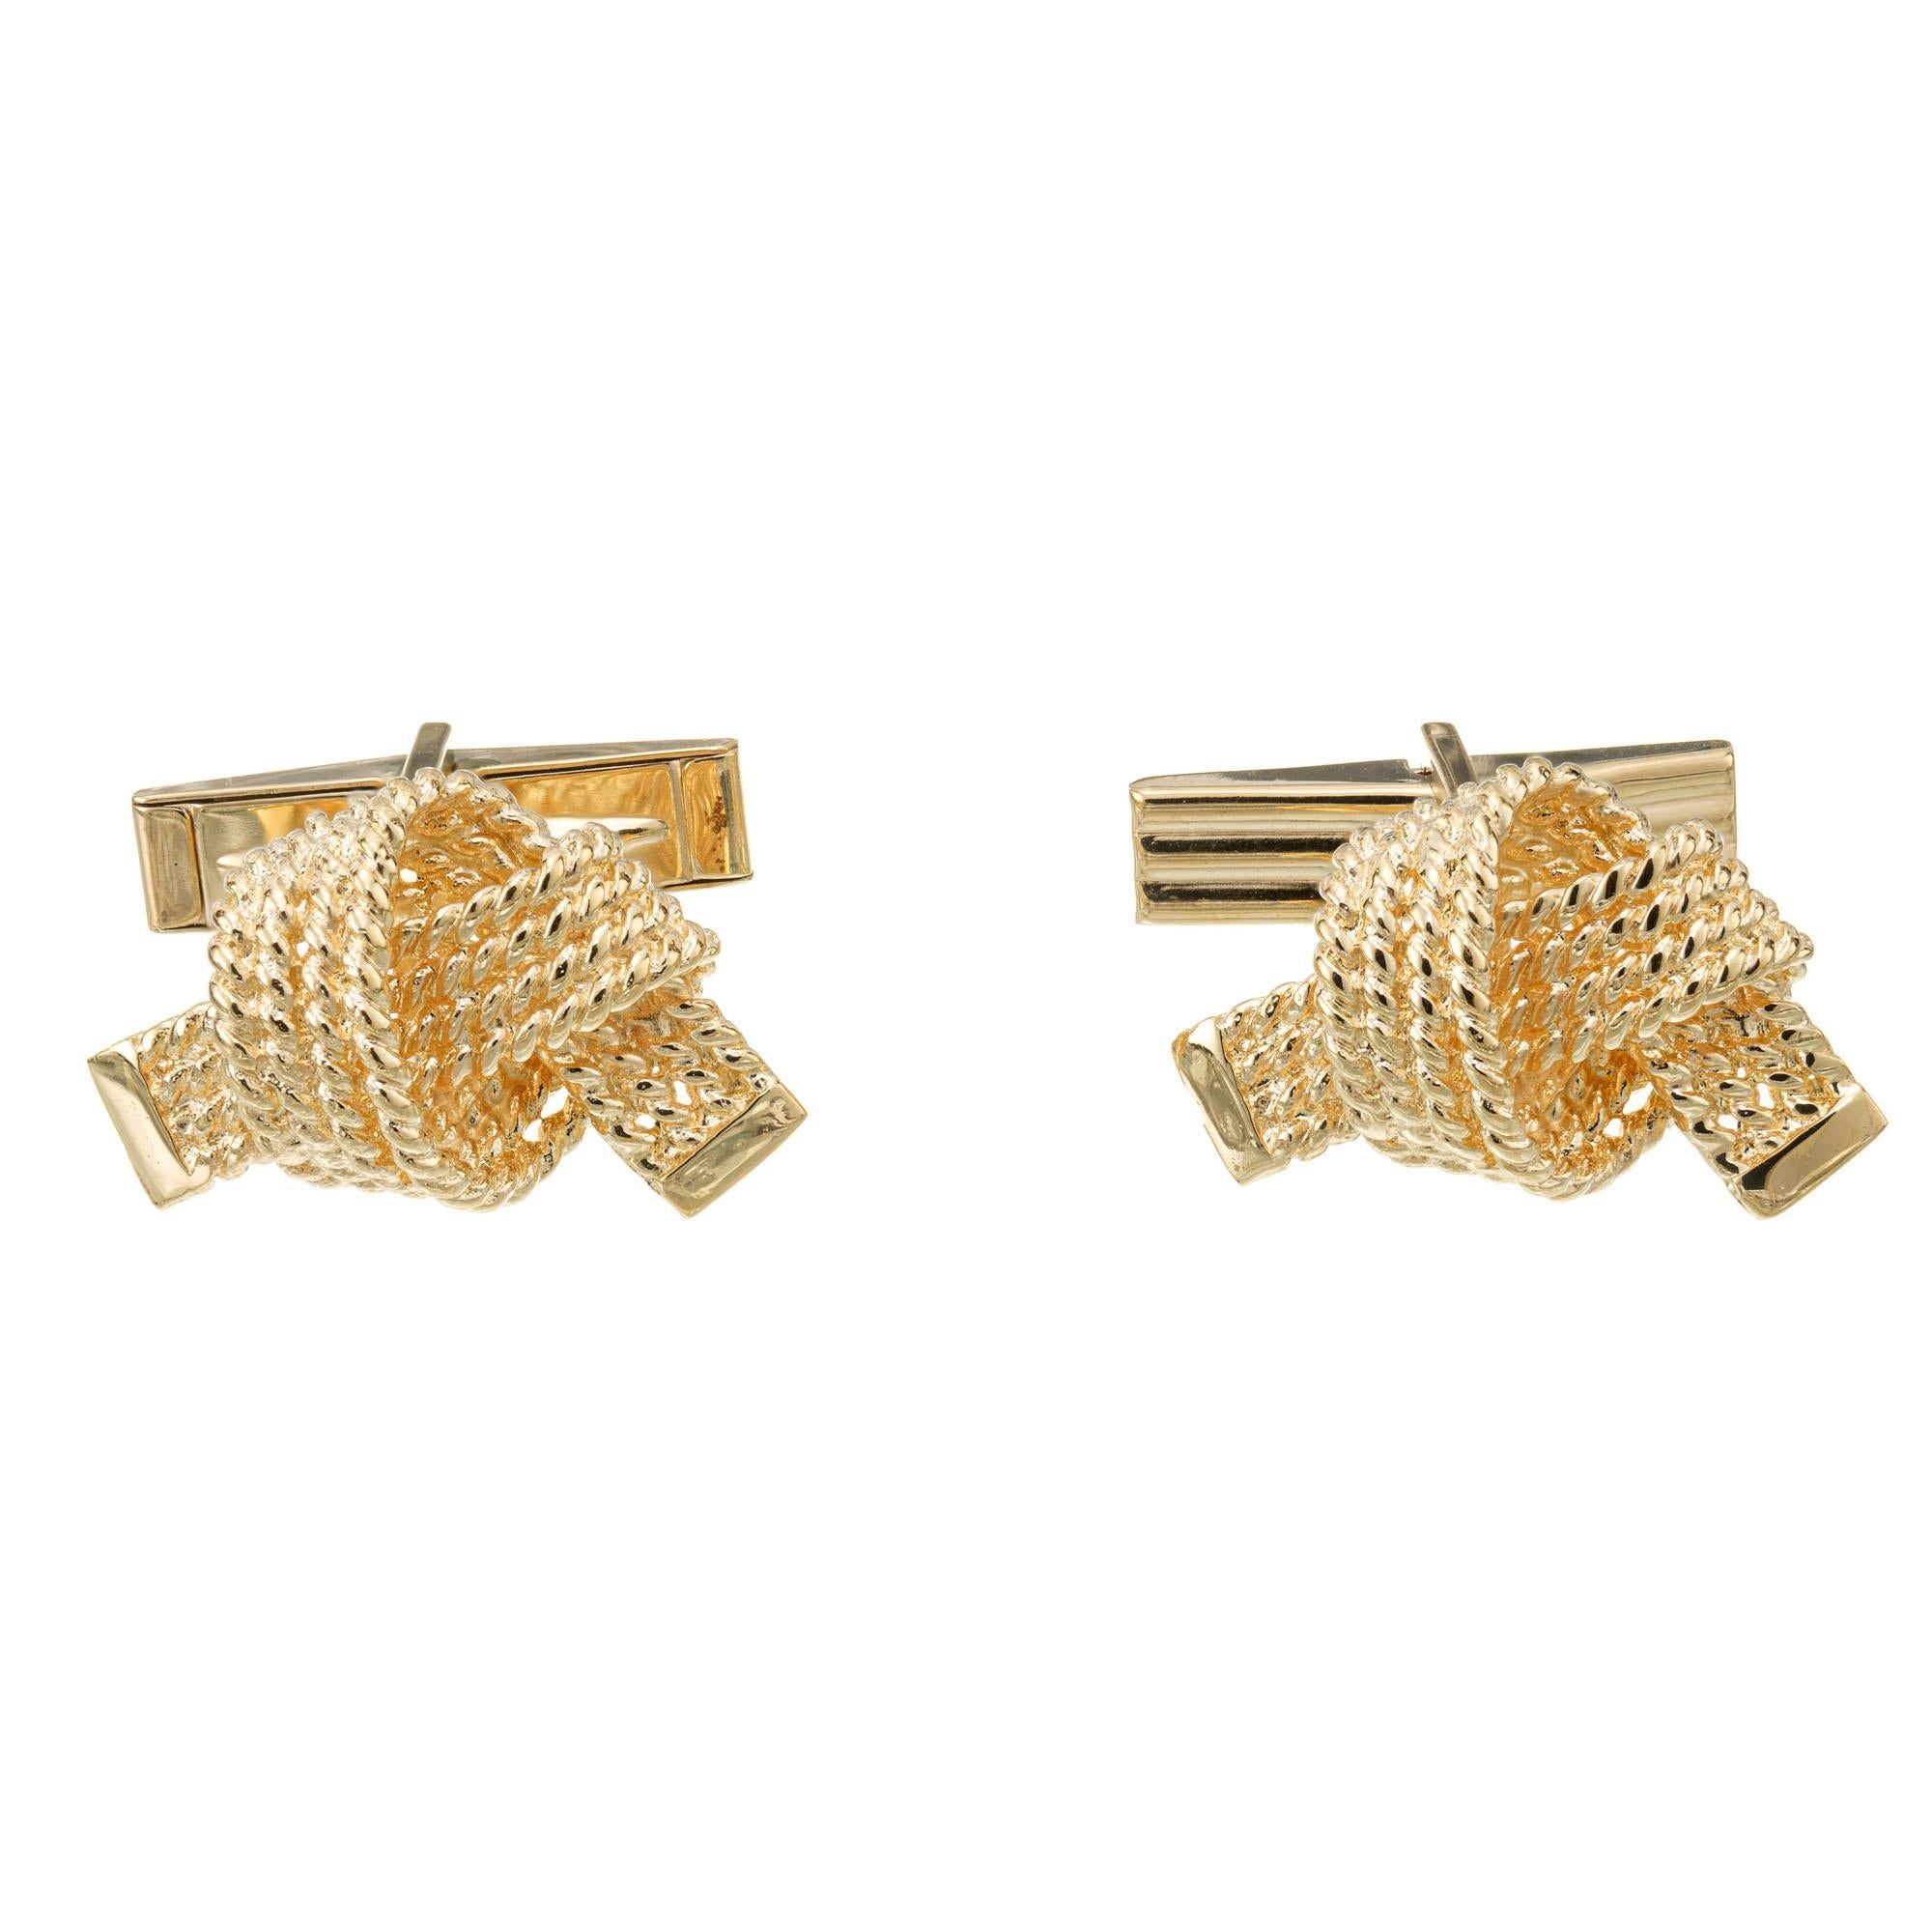 Vintage 1960's Mid-Century bow ribbon style cufflinks in 14k yellow gold. 

14k yellow gold 
Stamped: 14k
12.8 grams
Top to bottom:13.8mm or .5 Inch
Width: 21.7mm or 7/8 Inch
Depth or thickness: 8.7mm
